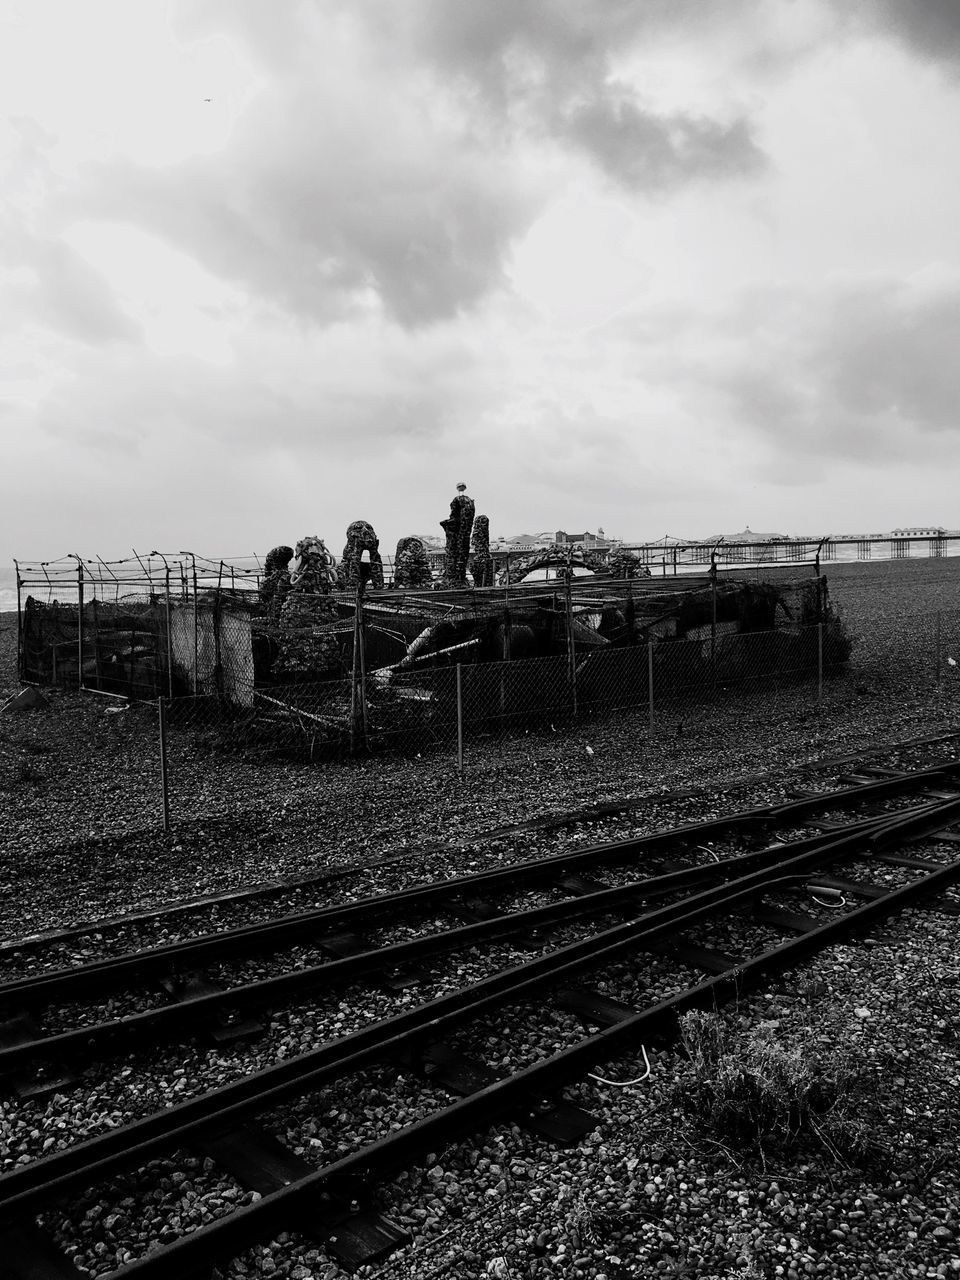 railroad track, rail transportation, sky, transportation, cloud - sky, field, public transportation, landscape, agriculture, rural scene, railway track, cloudy, train - vehicle, farm, cloud, day, no people, outdoors, metal, railroad station